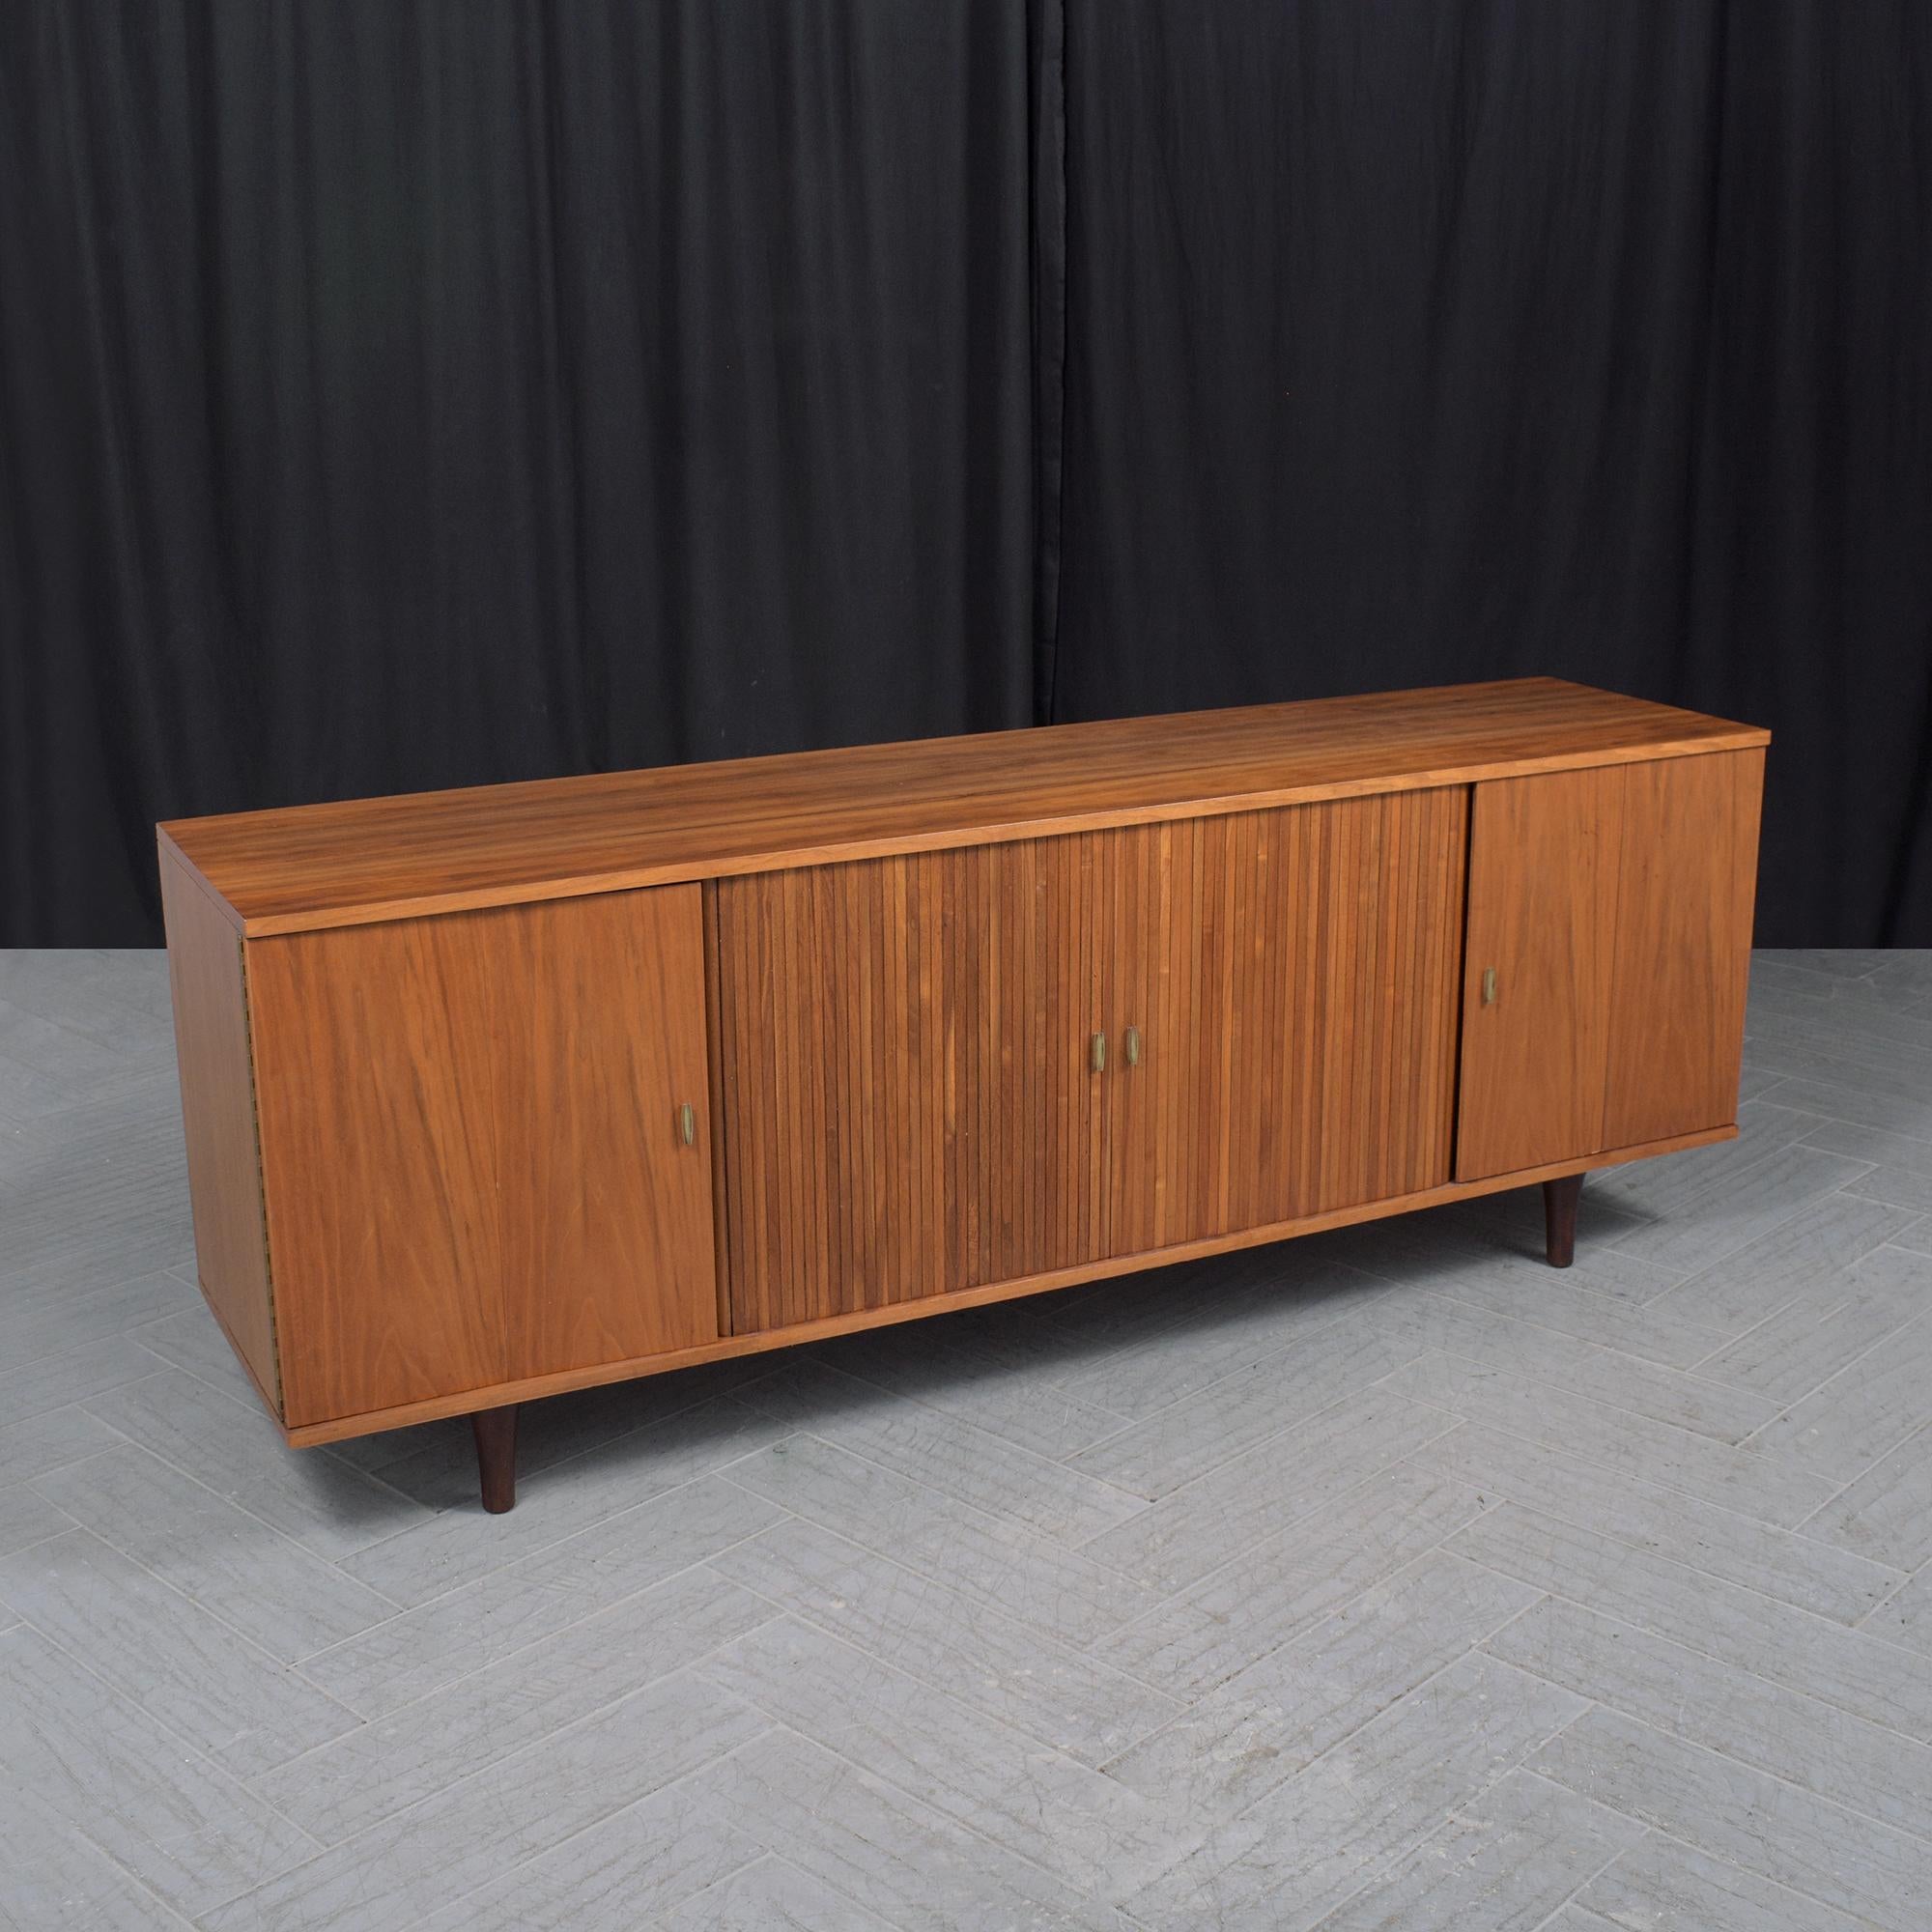 1960s Mid-Century Modern Walnut Credenza with Tambour Doors and Storage For Sale 6